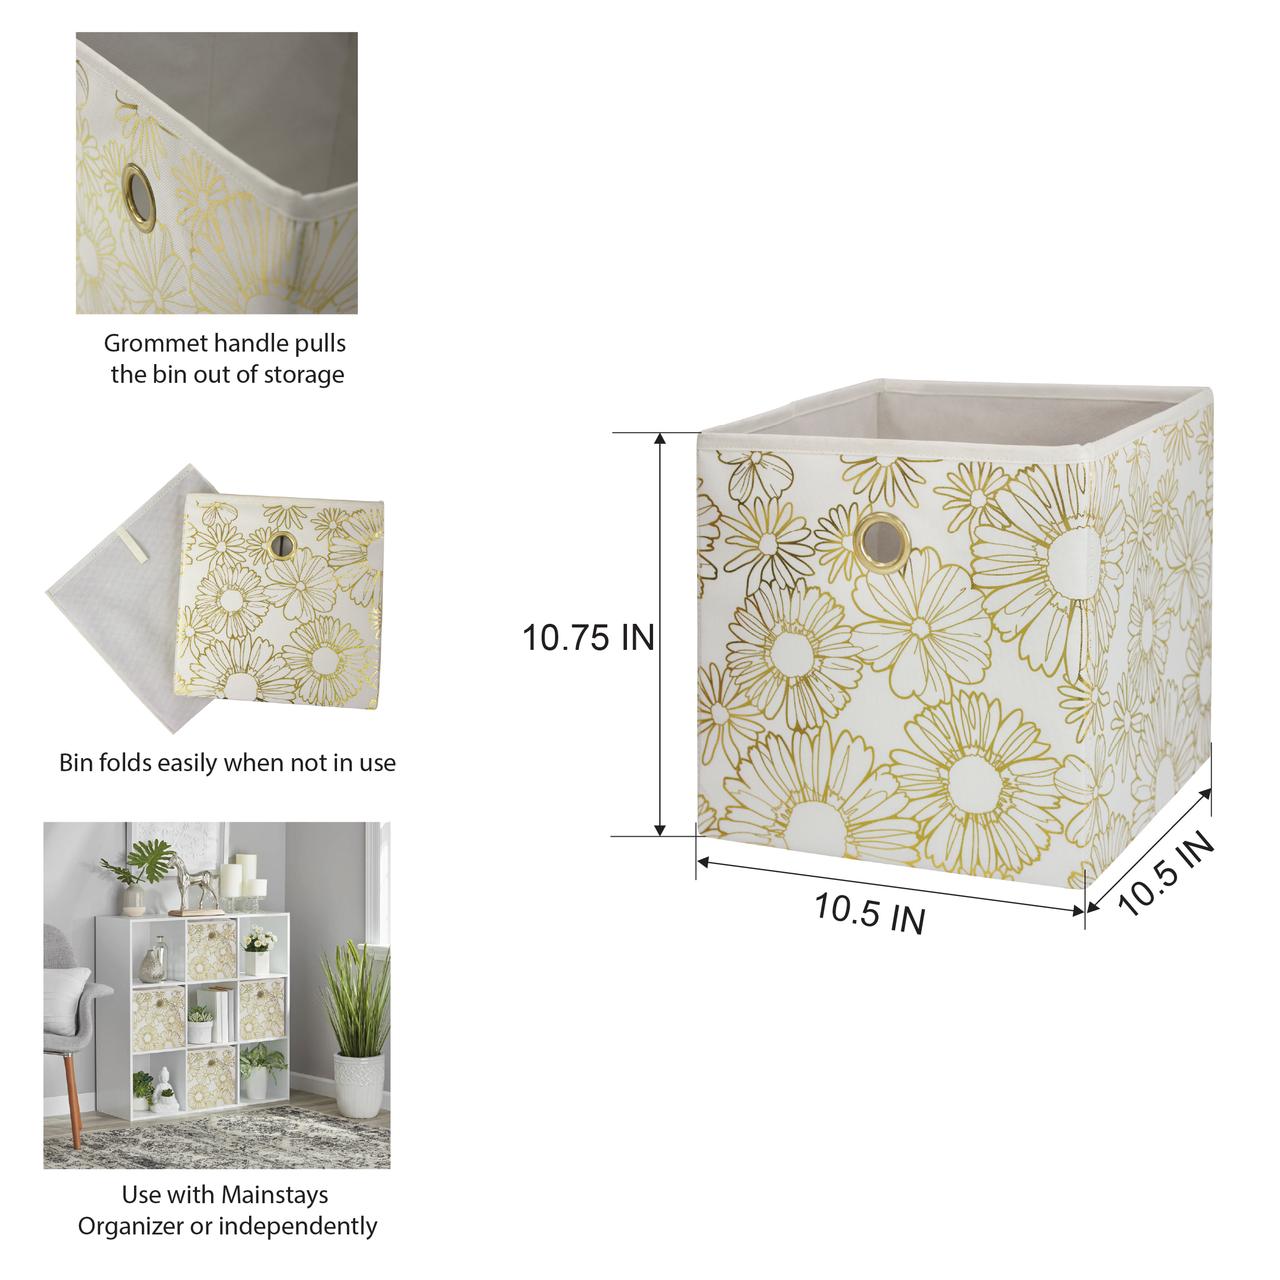 Mainstays Collapsible Fabric Cube Storage Bins (10.5" x 10.5"), 4 Pack, Gold Metallic - image 3 of 6